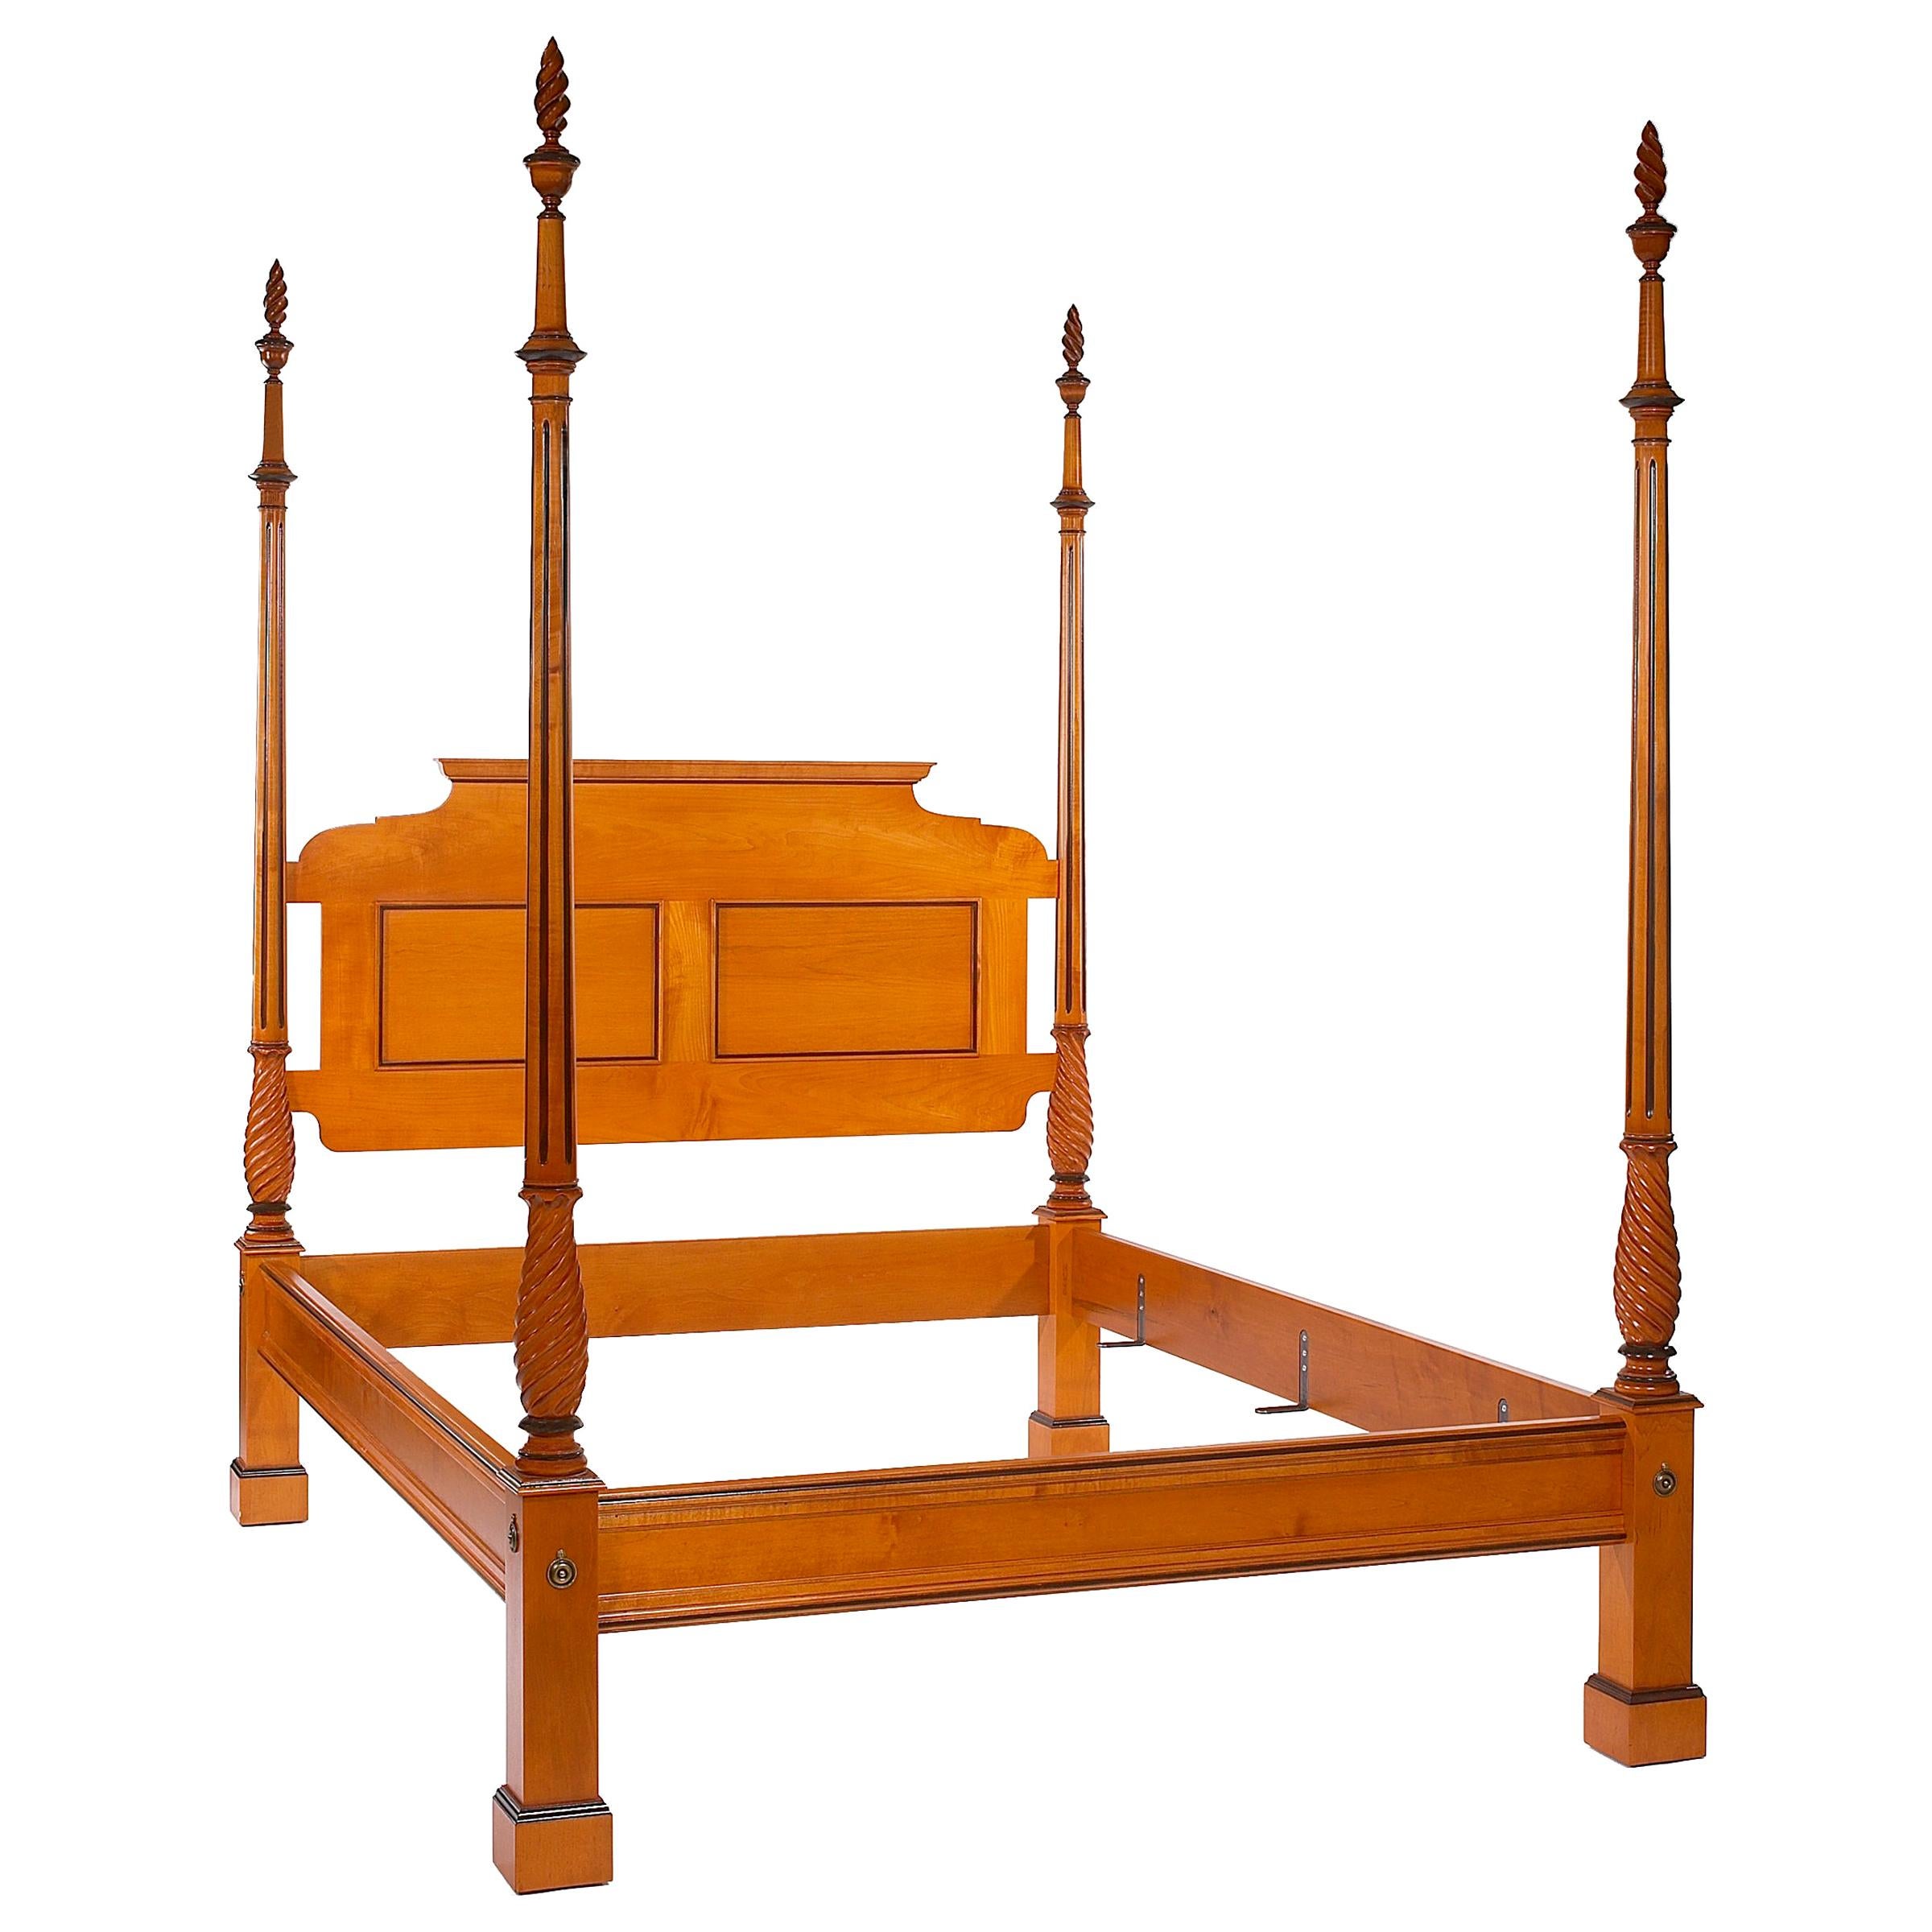 Four Poster Byron Bed with Carved Posts, Panel Headboard and Flame Finials 